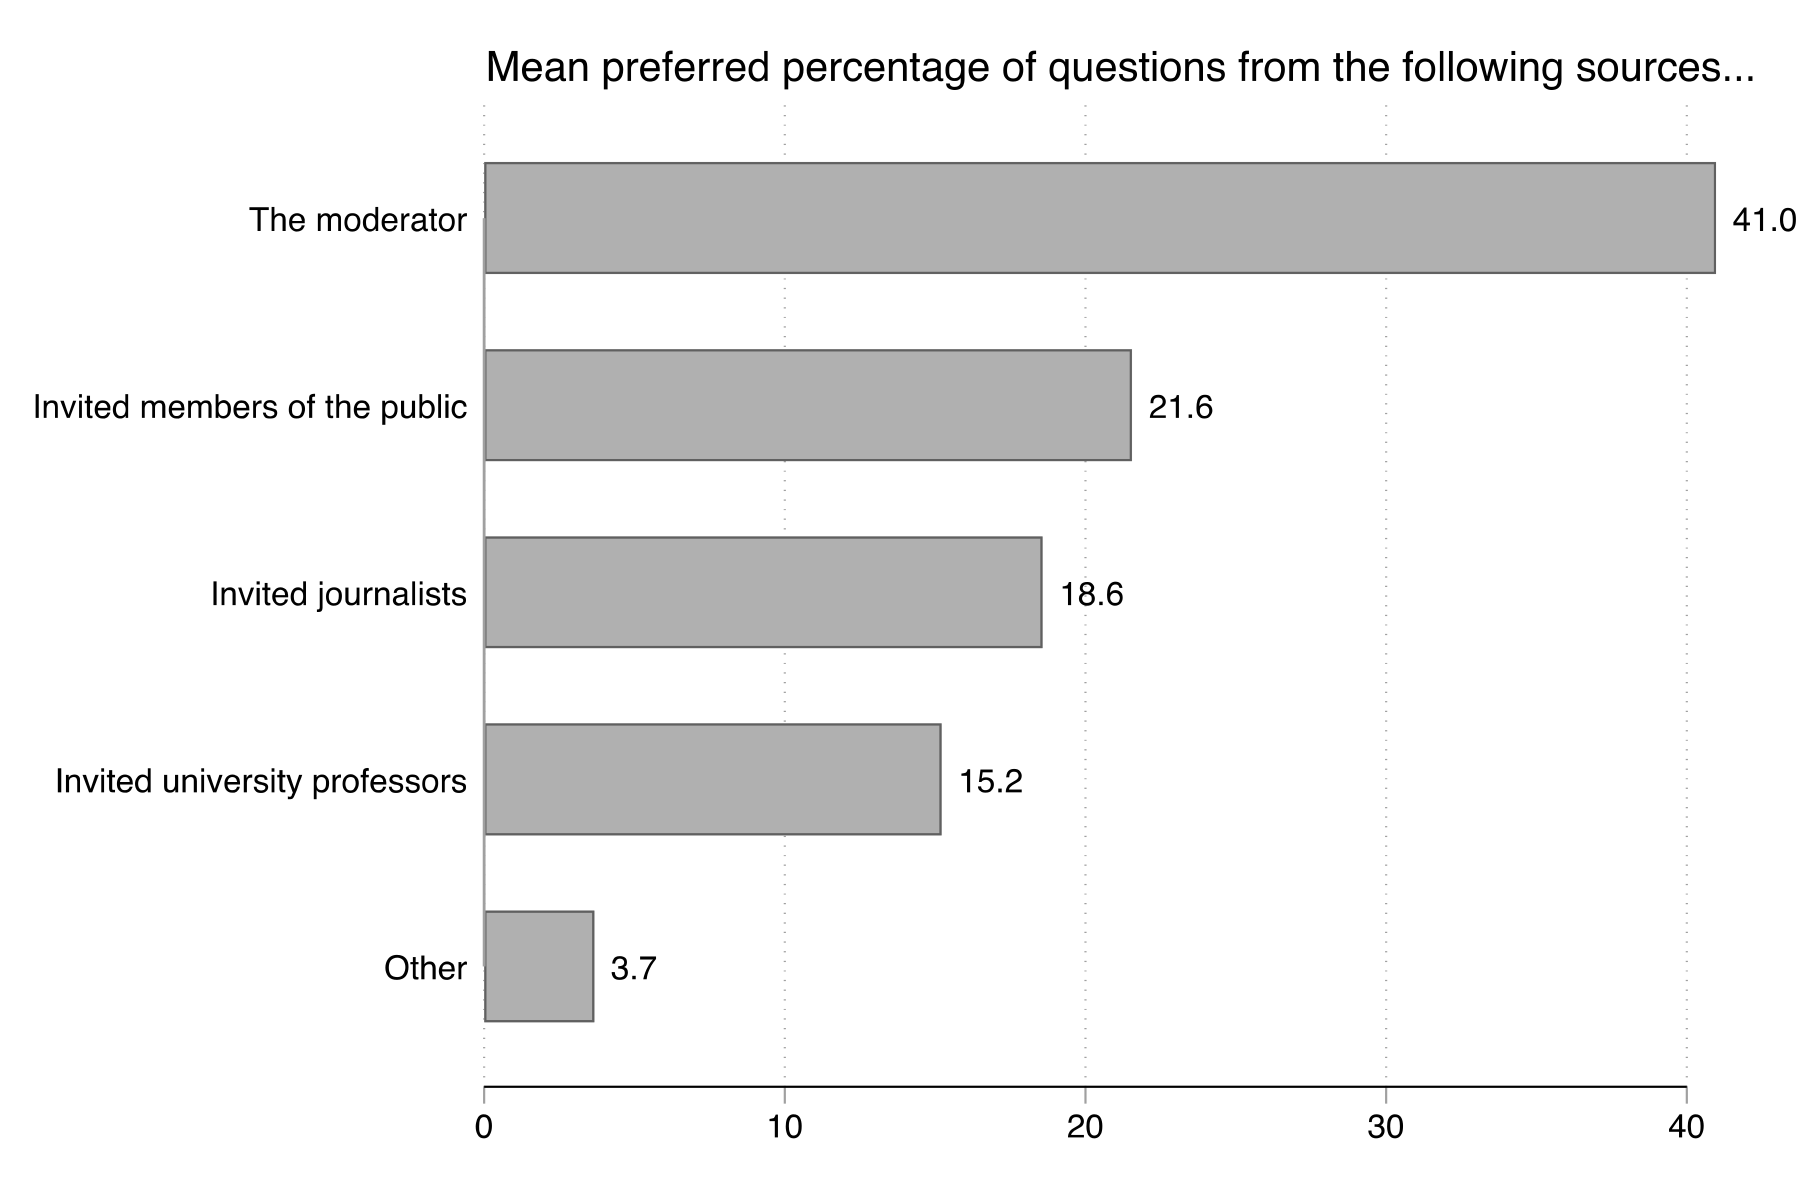 Figure 34. This figure shows the mean preferred percentage of debate questions allocated to different sources. On average, participants allocated 41% of questions to the moderator, 22% to invited members of the public, 19% to invited journalists, and 15% to invited university professors.